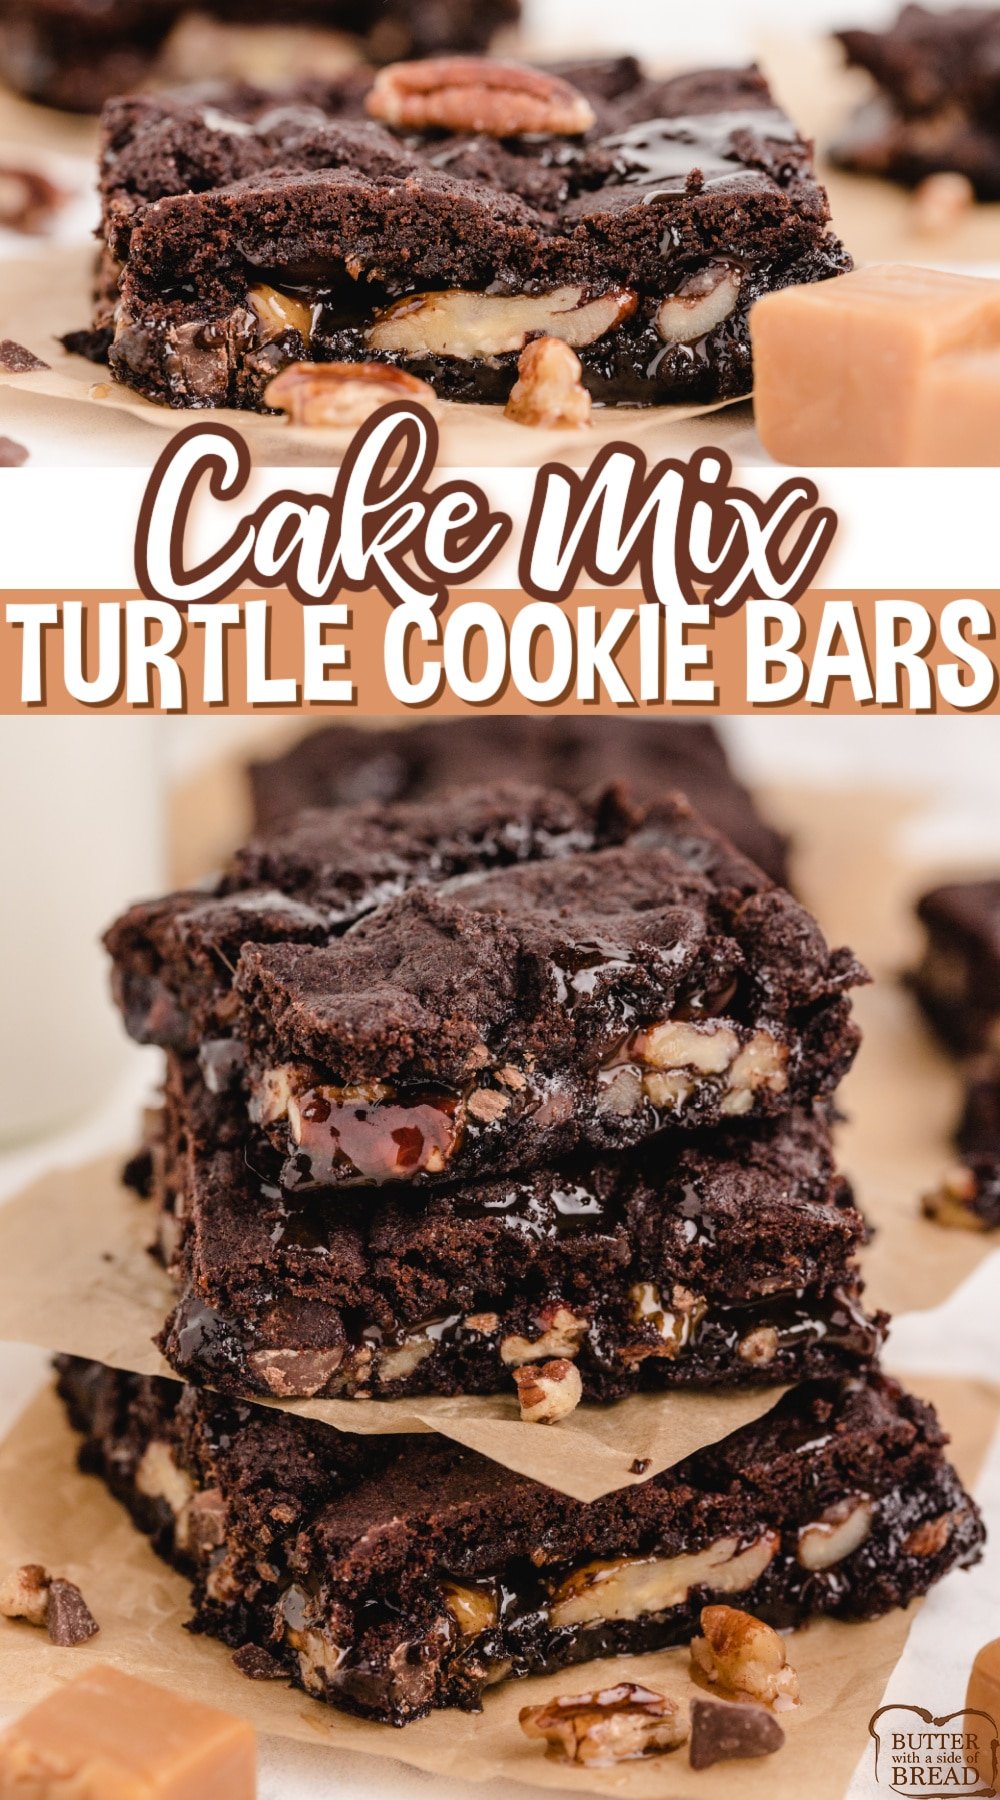 Cake Mix Turtle Cookie Bars made with a cake mix, chocolate chips, pecans and caramel topping. Gooey, delicious cookie bar recipe that is so easy to make! 